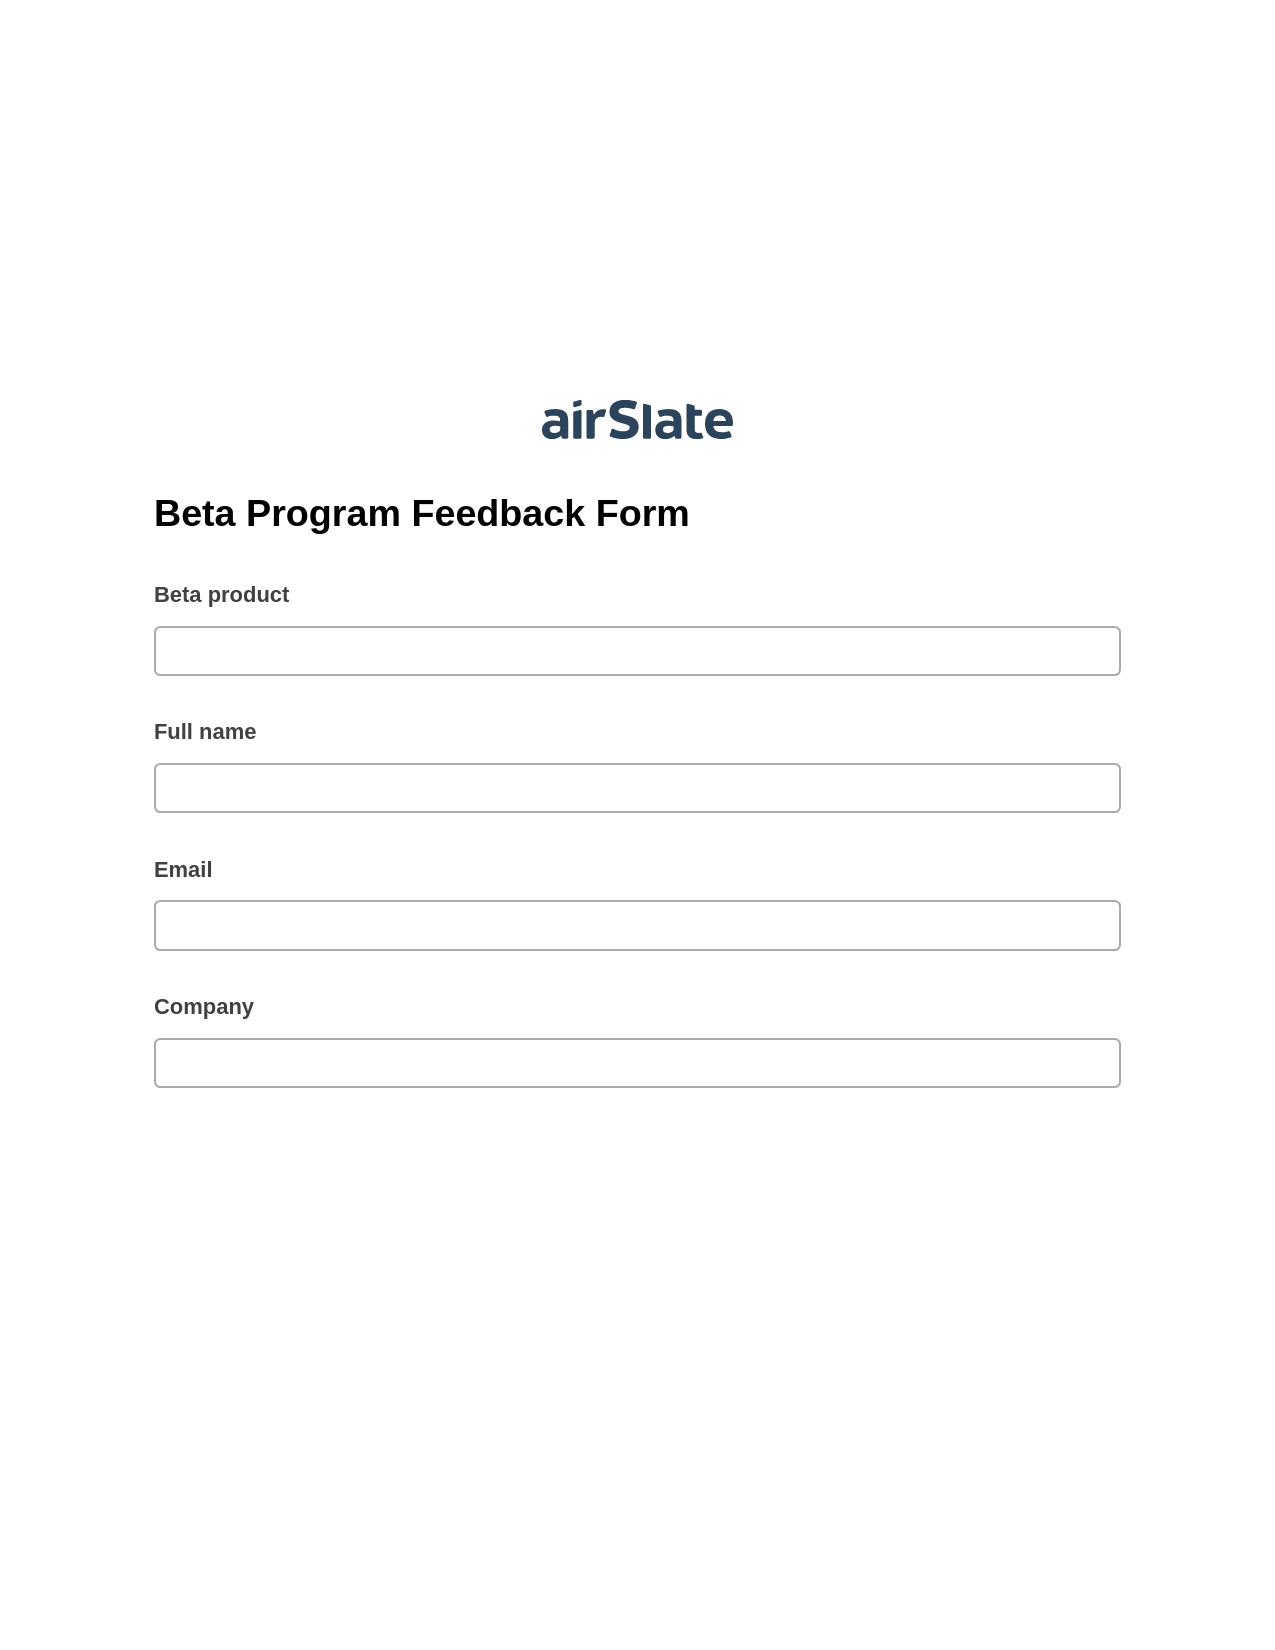 Multirole Beta Program Feedback Form Pre-fill from Google Sheets Bot, Unassign Role Bot, Export to NetSuite Record Bot